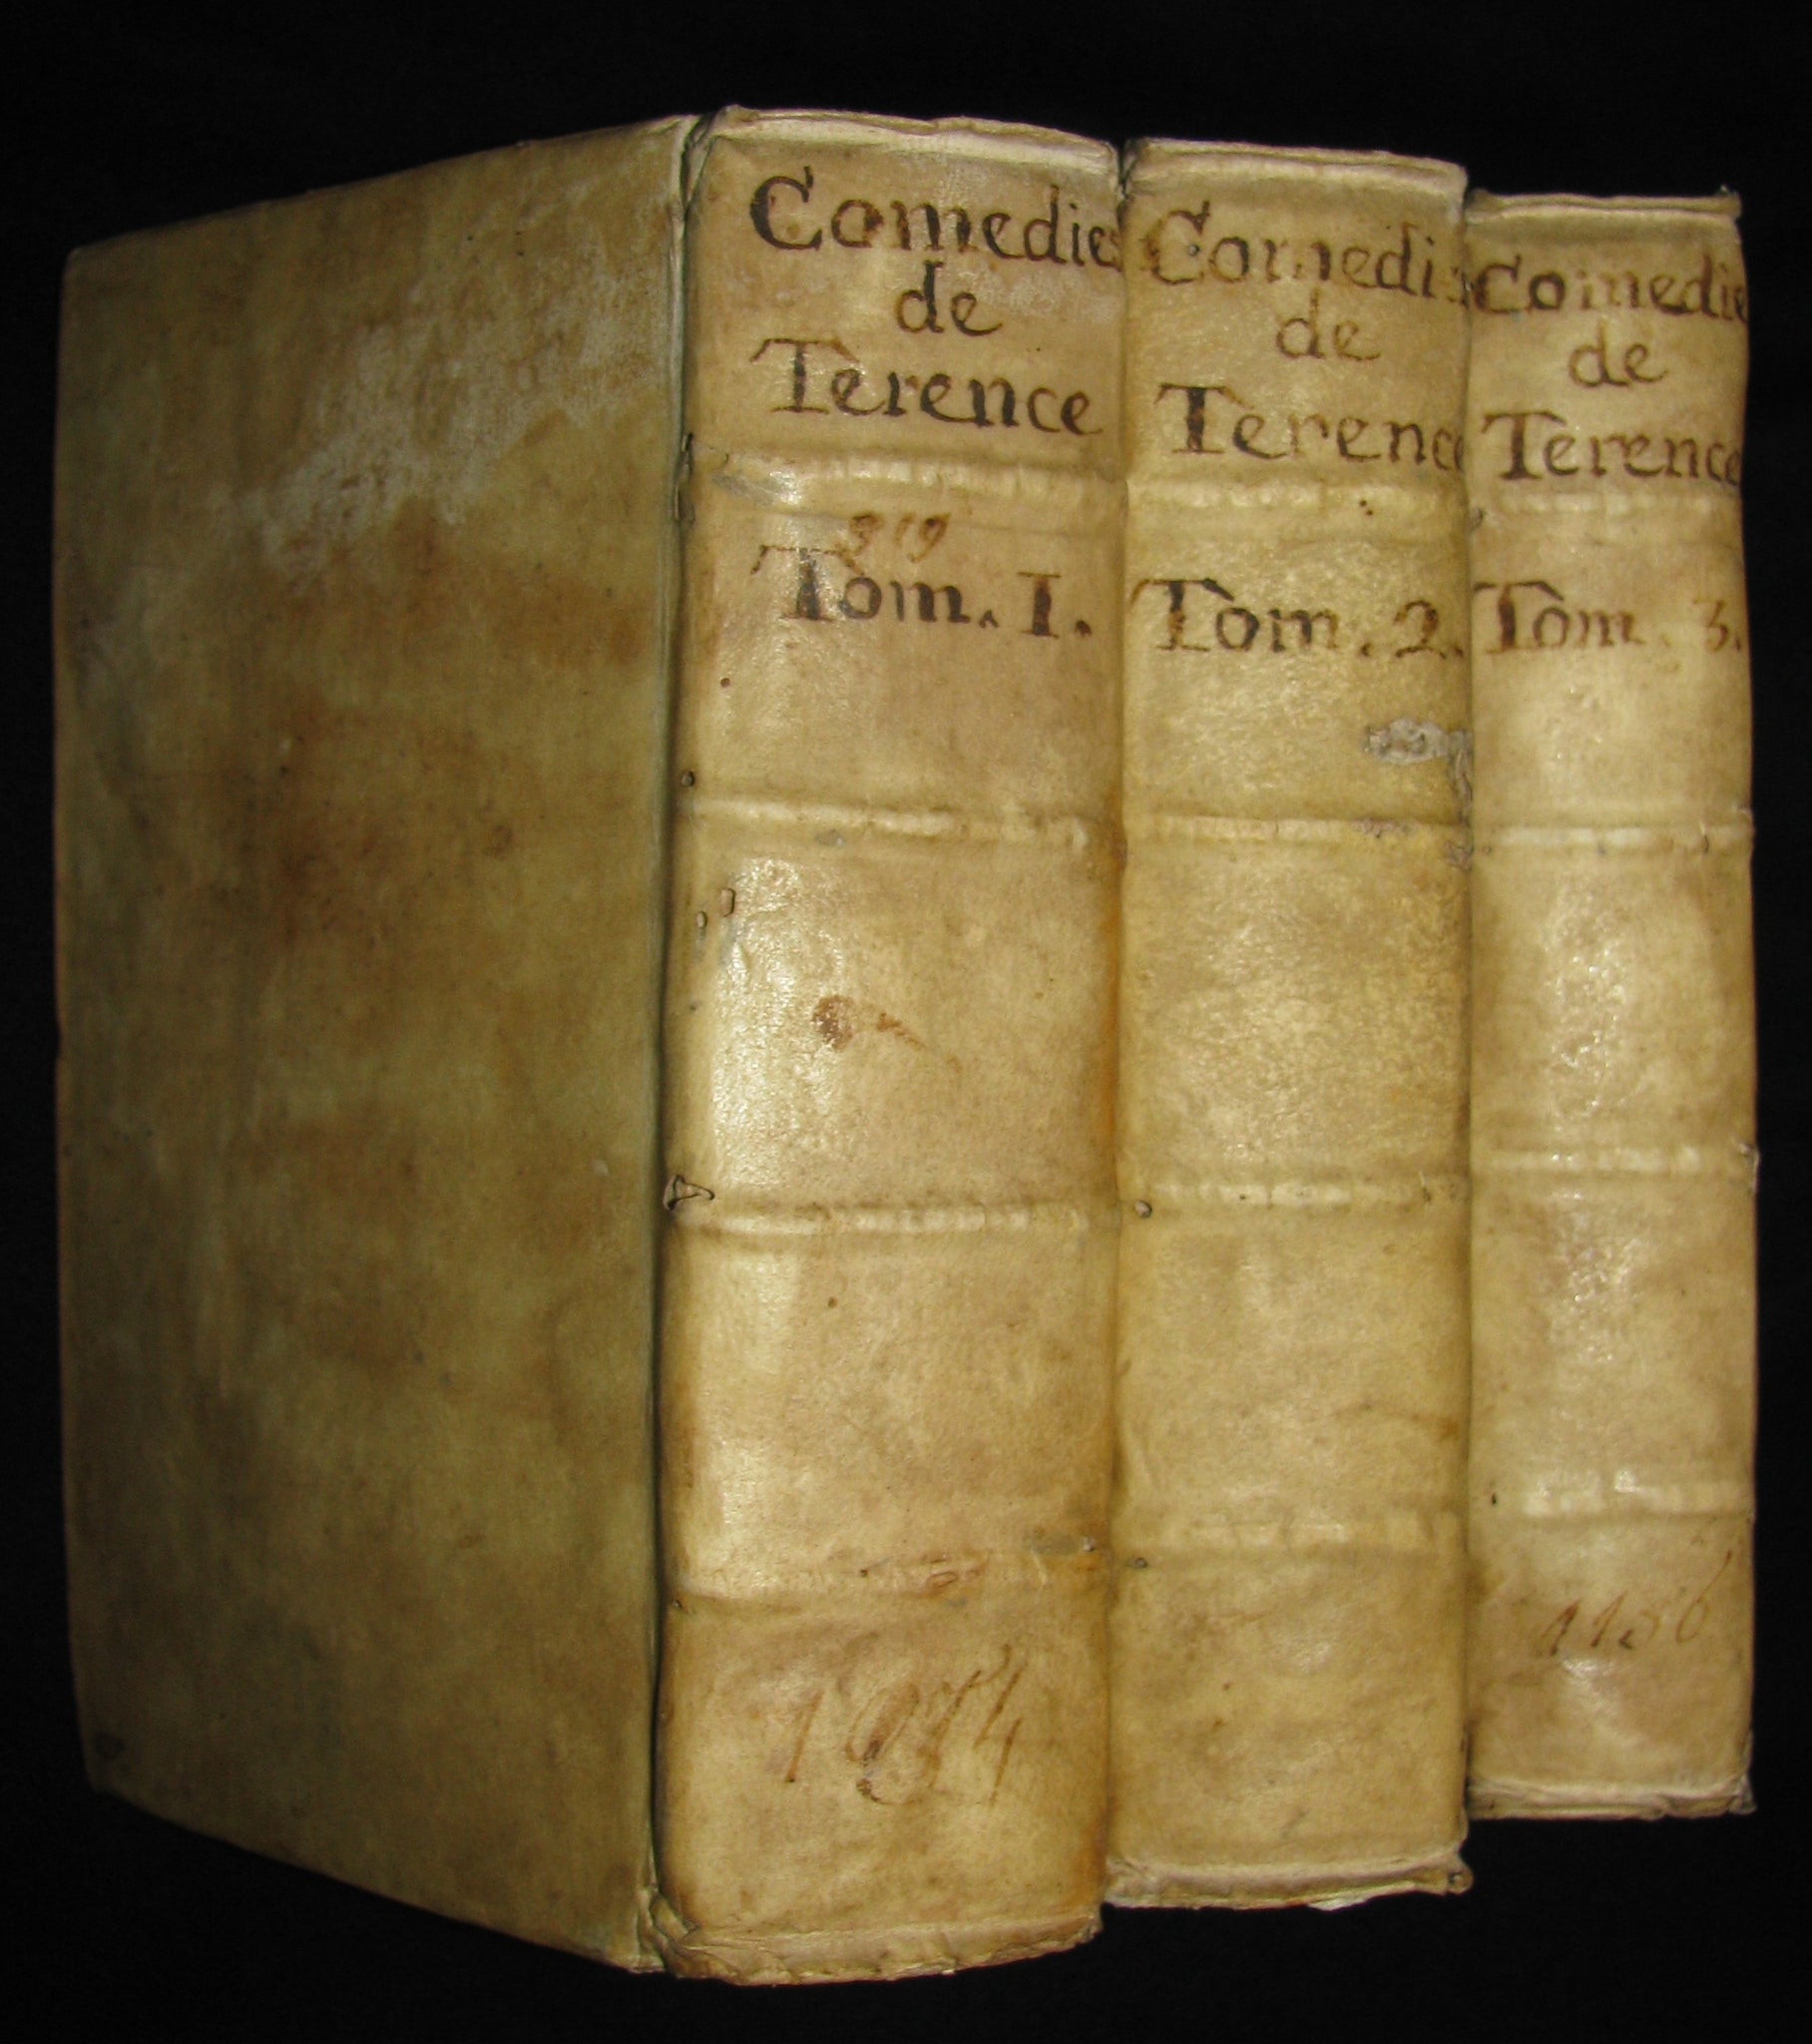 1695 Scarce Latin French vellum Bookset - Les Comedies de Terence - Terence's Comedies